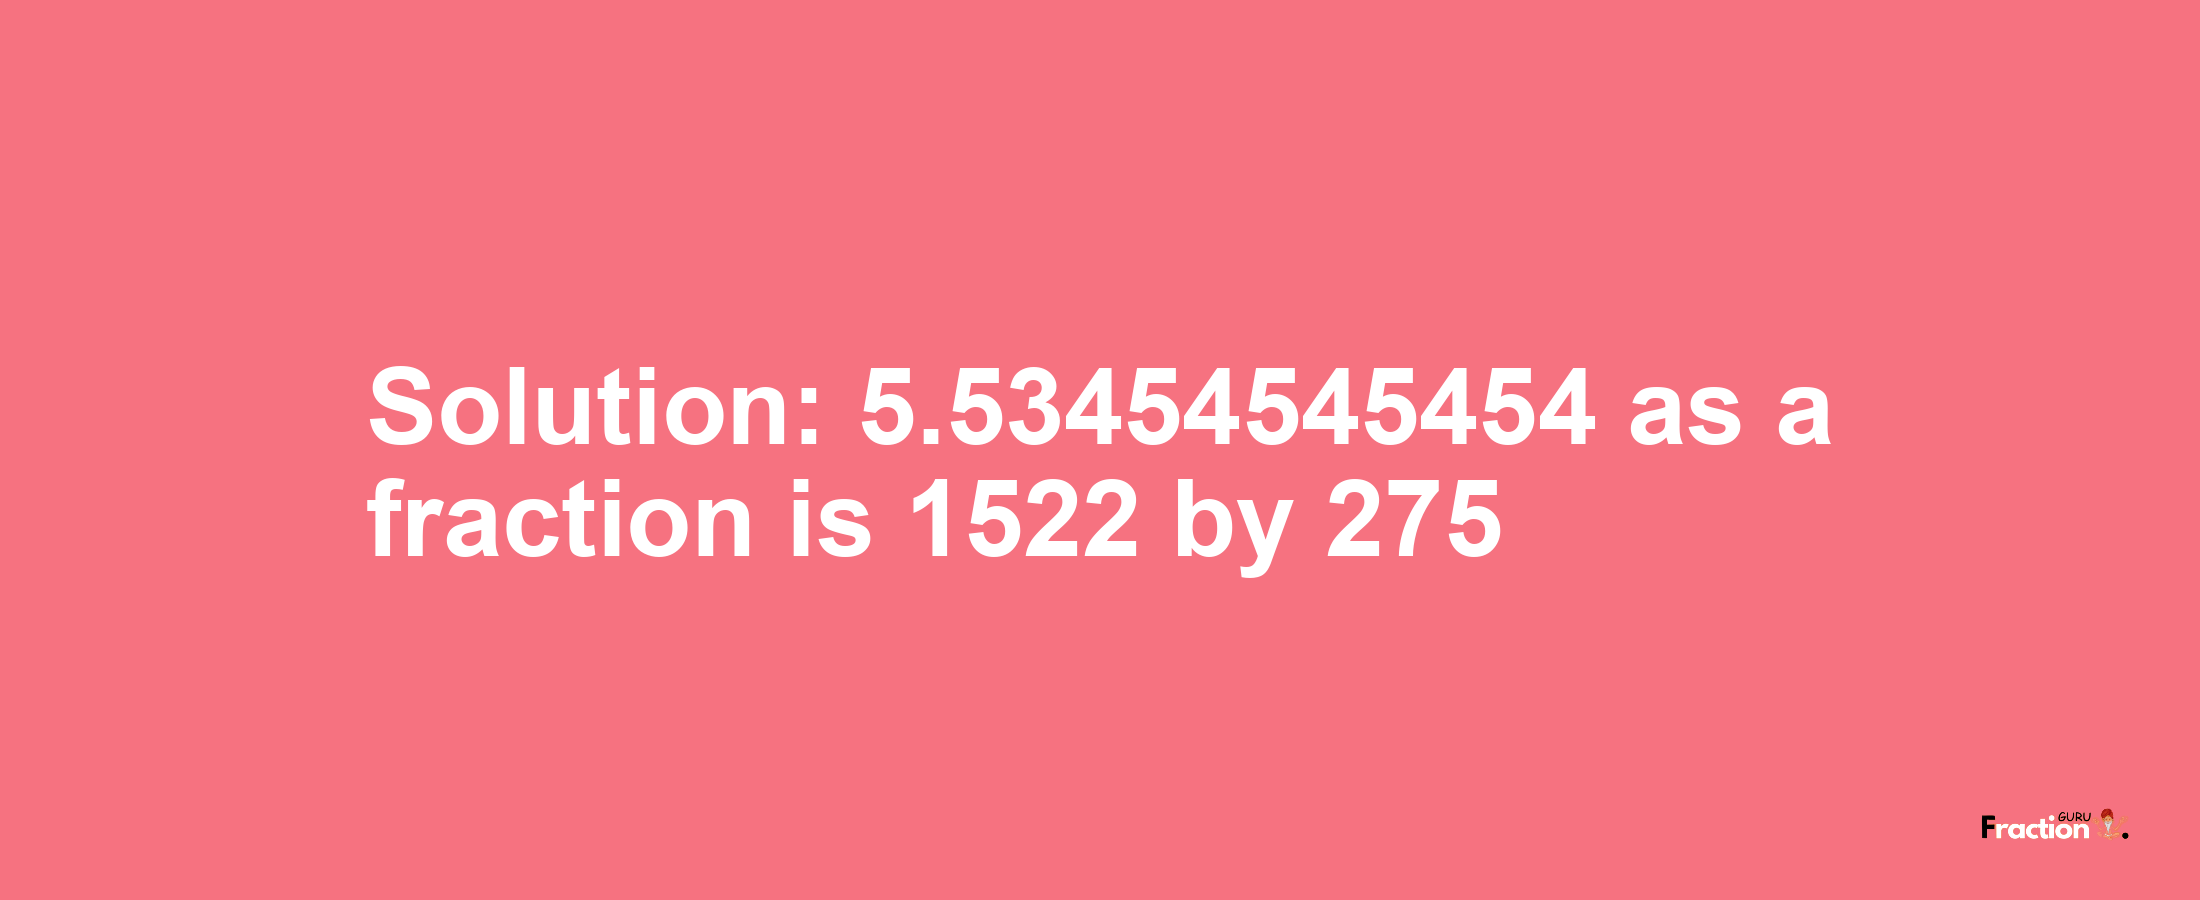 Solution:5.53454545454 as a fraction is 1522/275